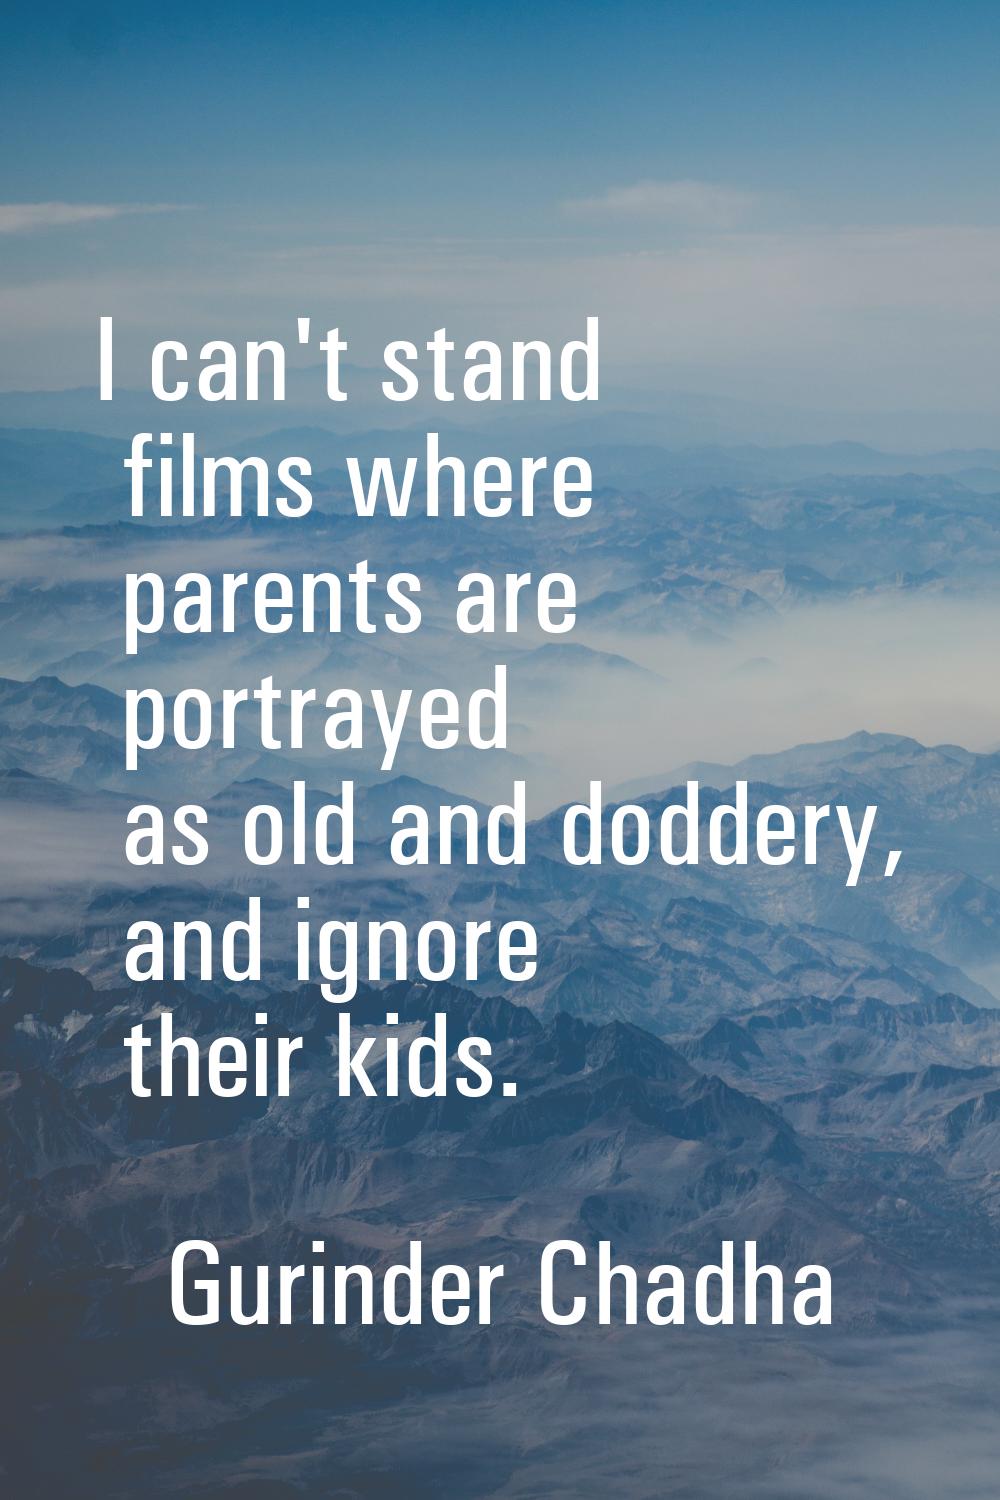 I can't stand films where parents are portrayed as old and doddery, and ignore their kids.